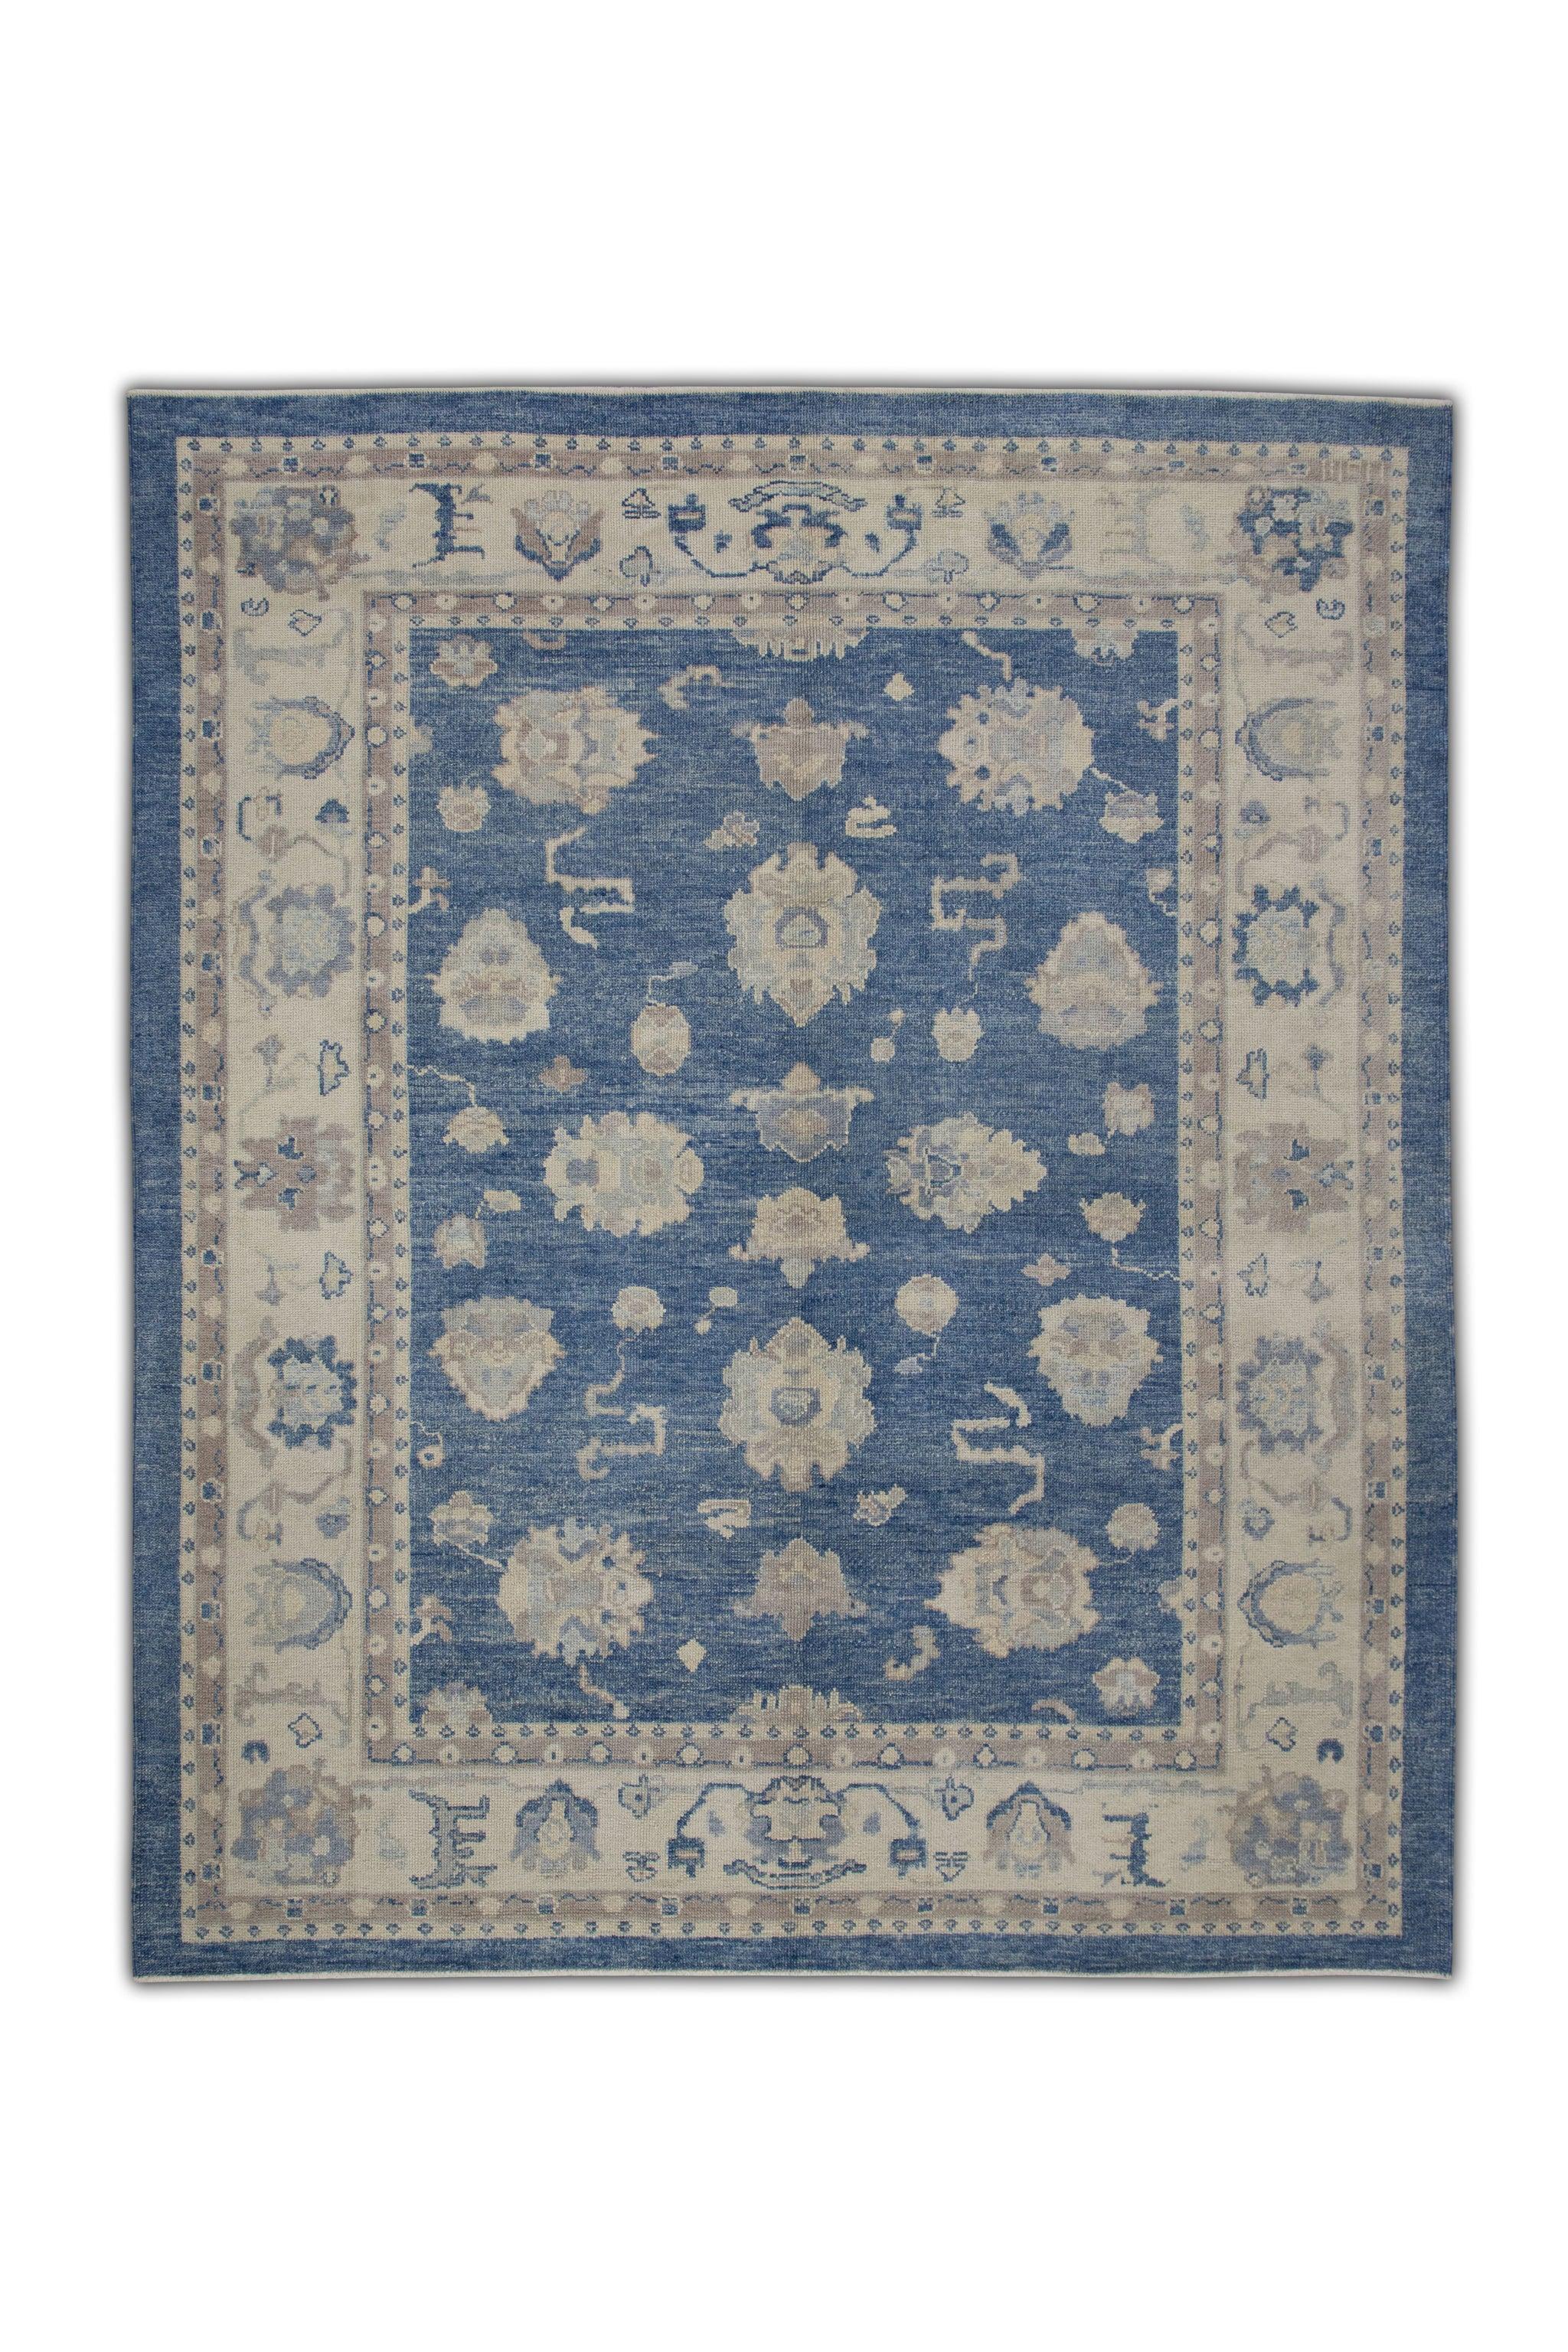 Floral Handwoven Wool Turkish Oushak Rug in Blue and Cream 8'9